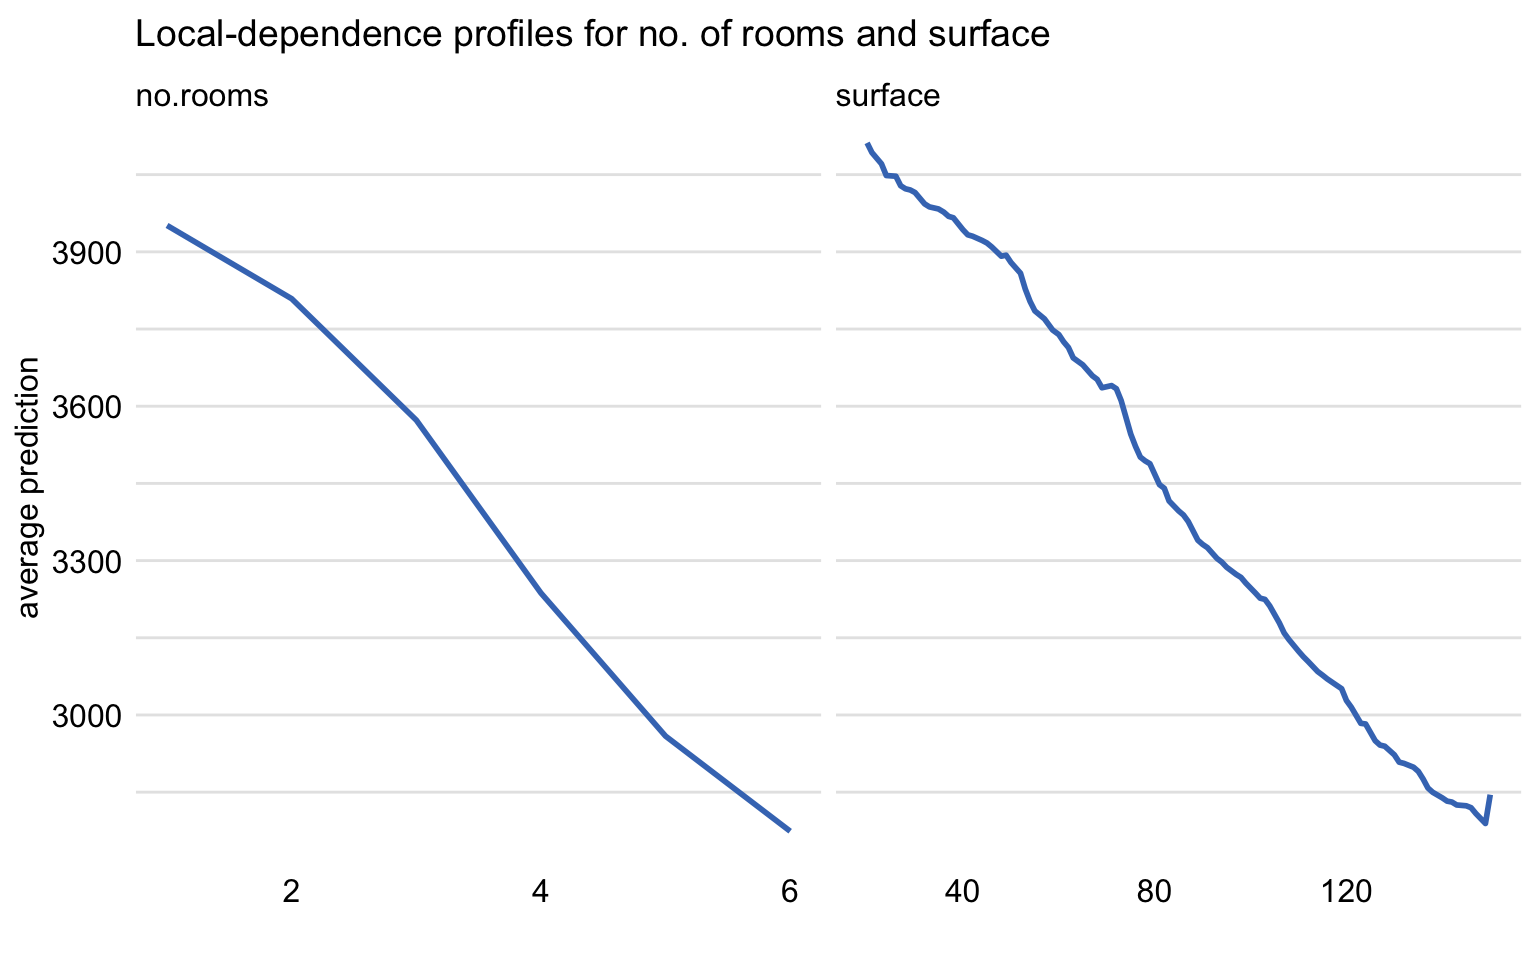 Local-dependence profiles for the random forest model and explanatory variables no.rooms and surface for the apartment-prices dataset.